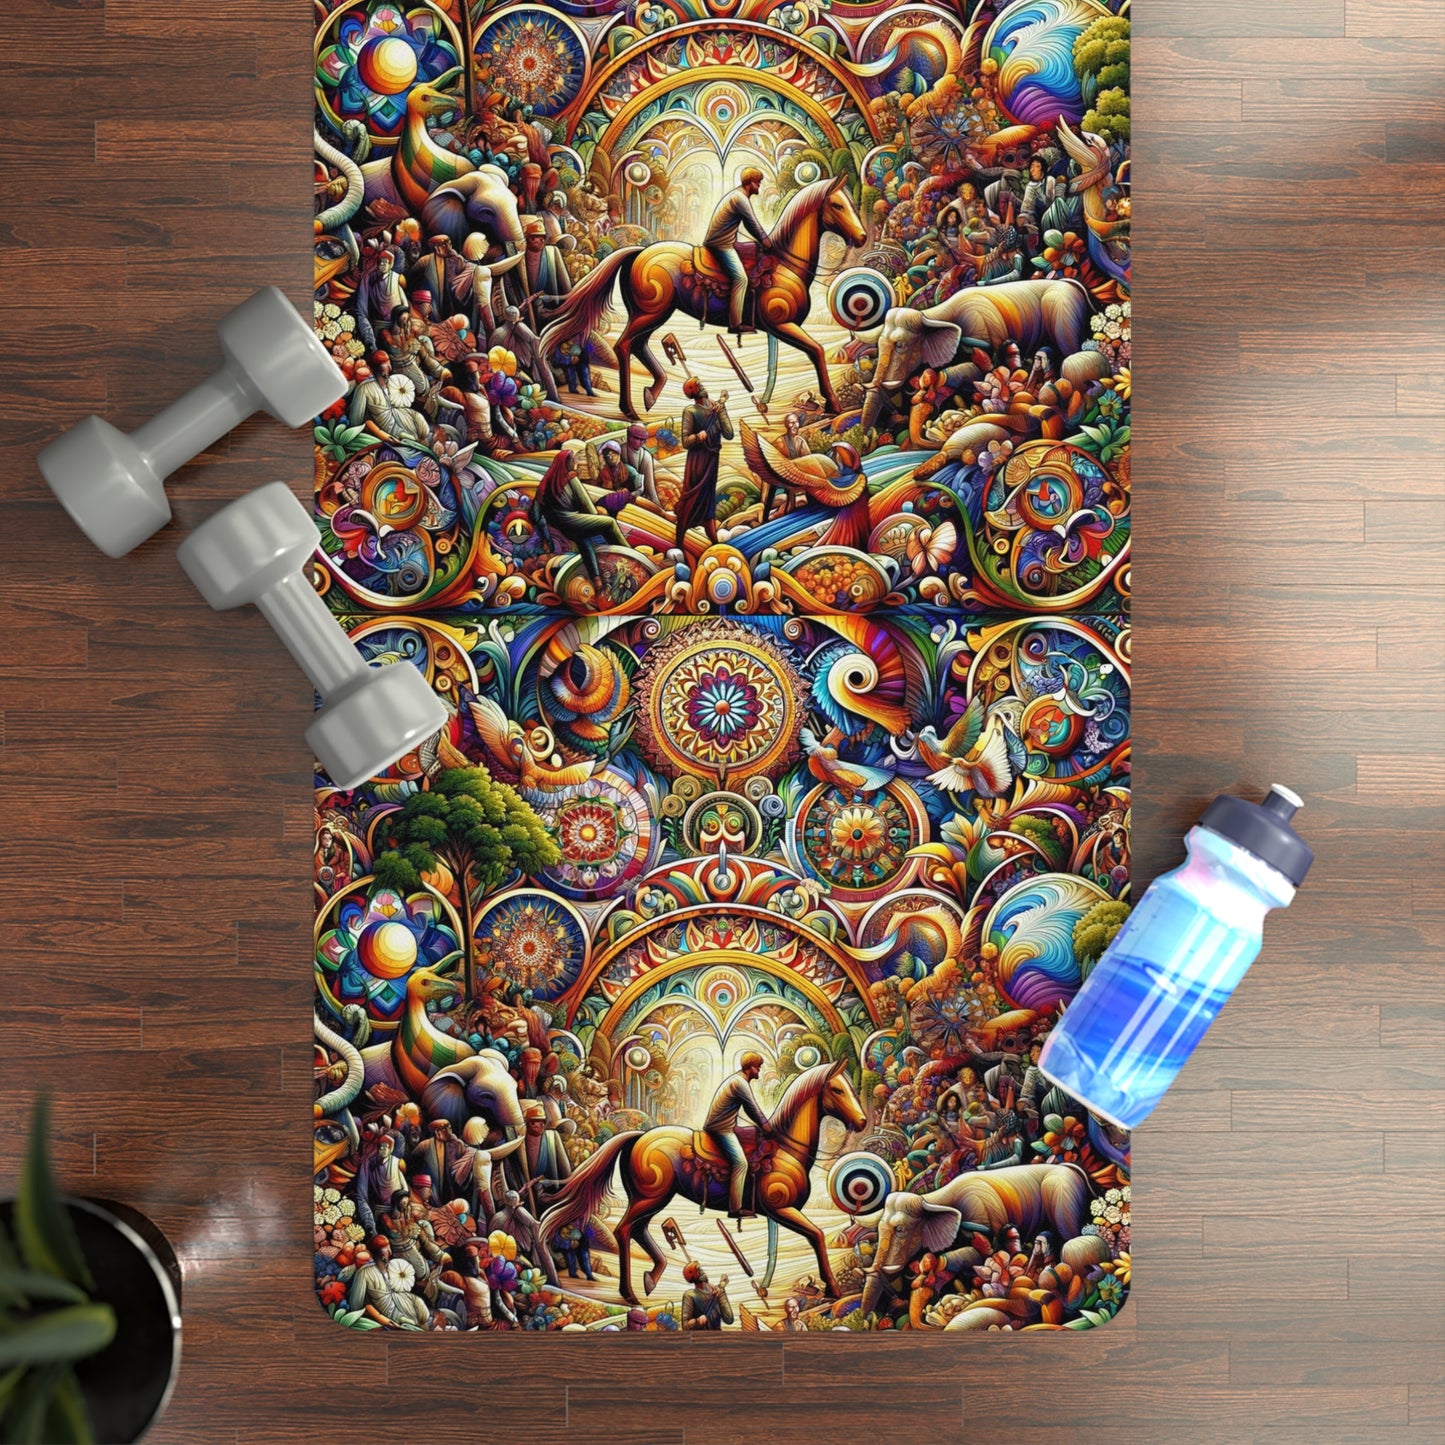 Voyager's Delight Yoga Mat - Luxurious Microfiber with Exquisite Global Design